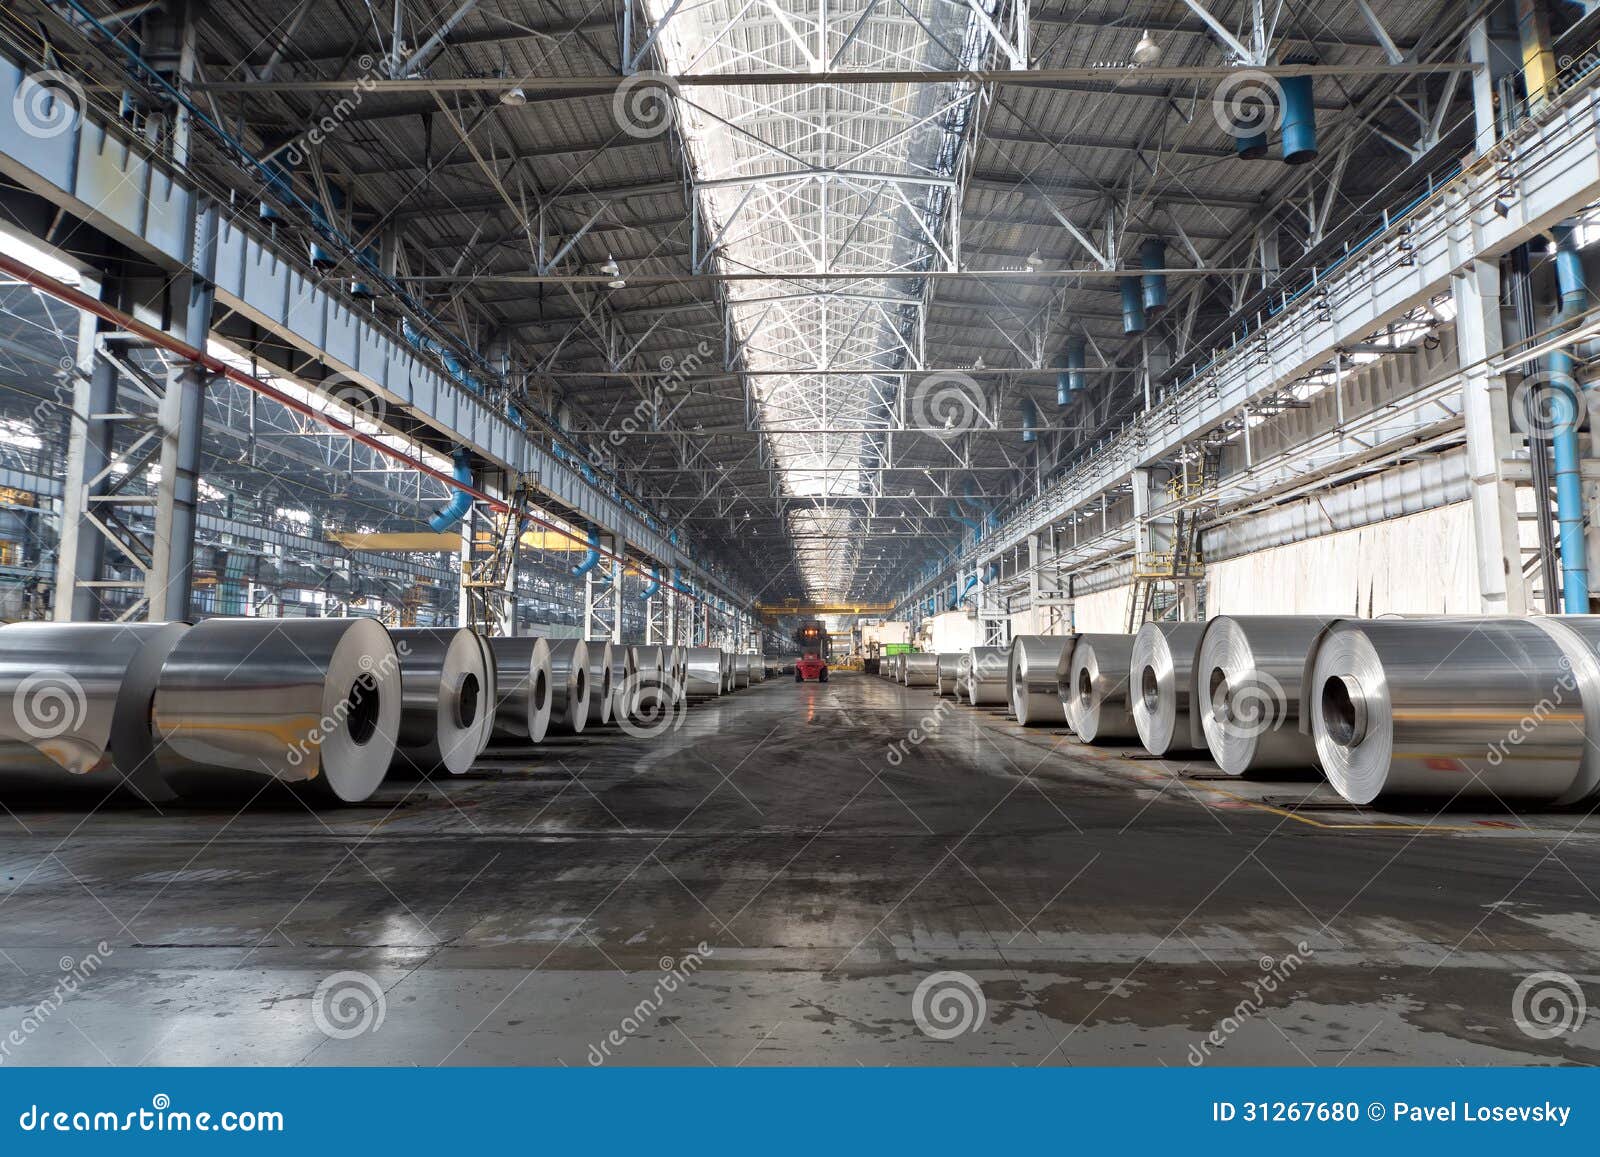 rows of rolls of aluminum lie in production shop